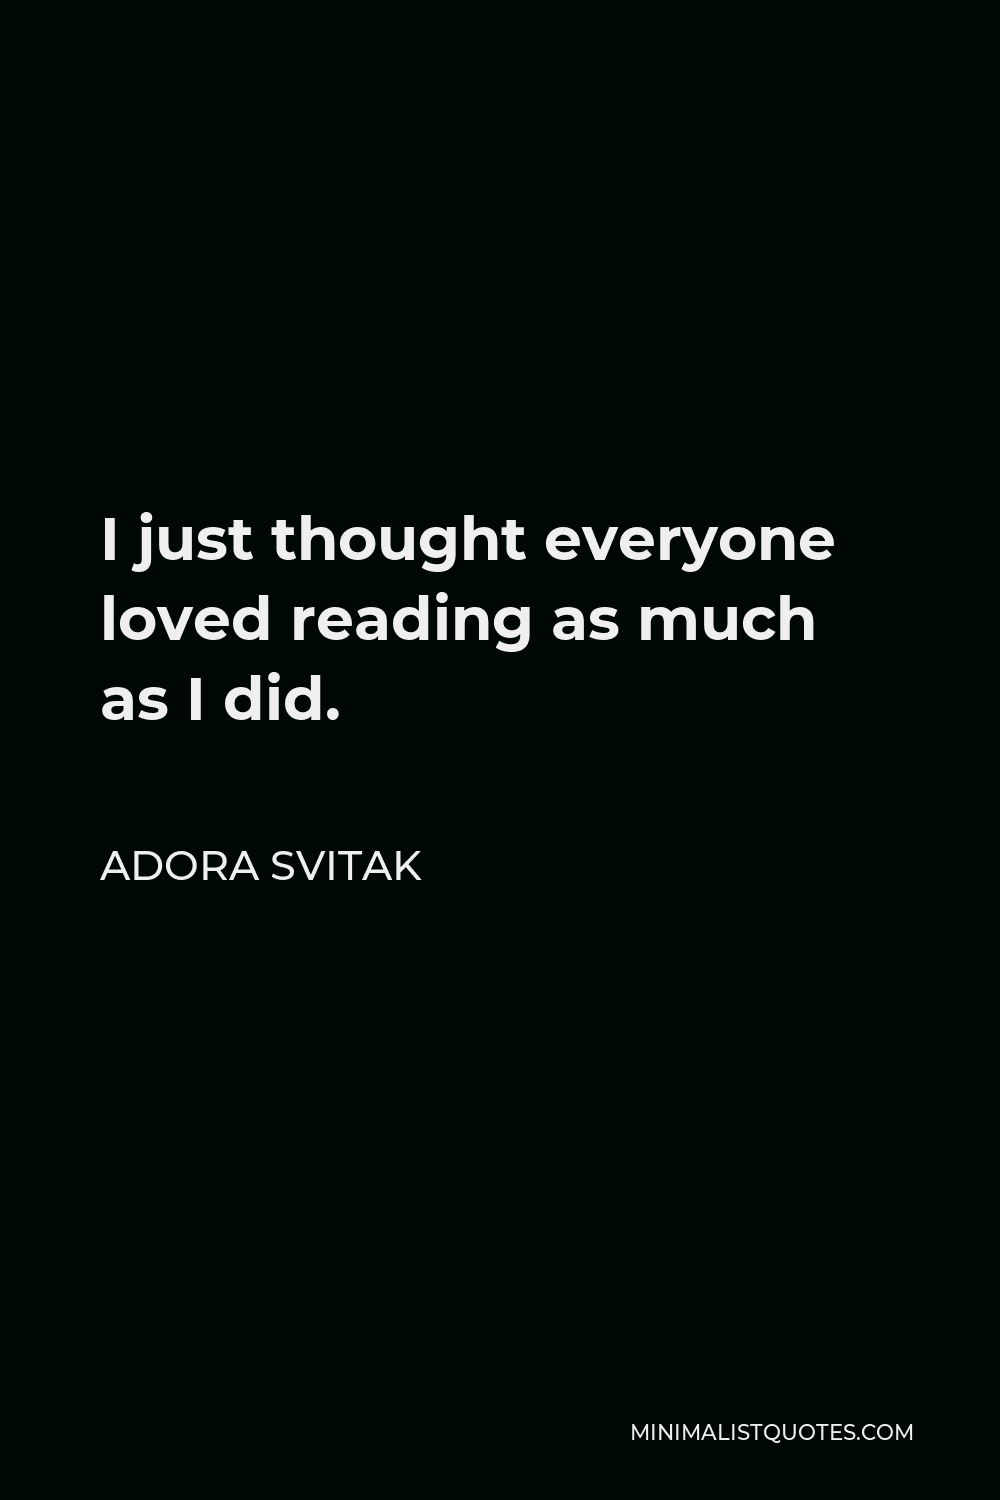 Adora Svitak Quote - I just thought everyone loved reading as much as I did.